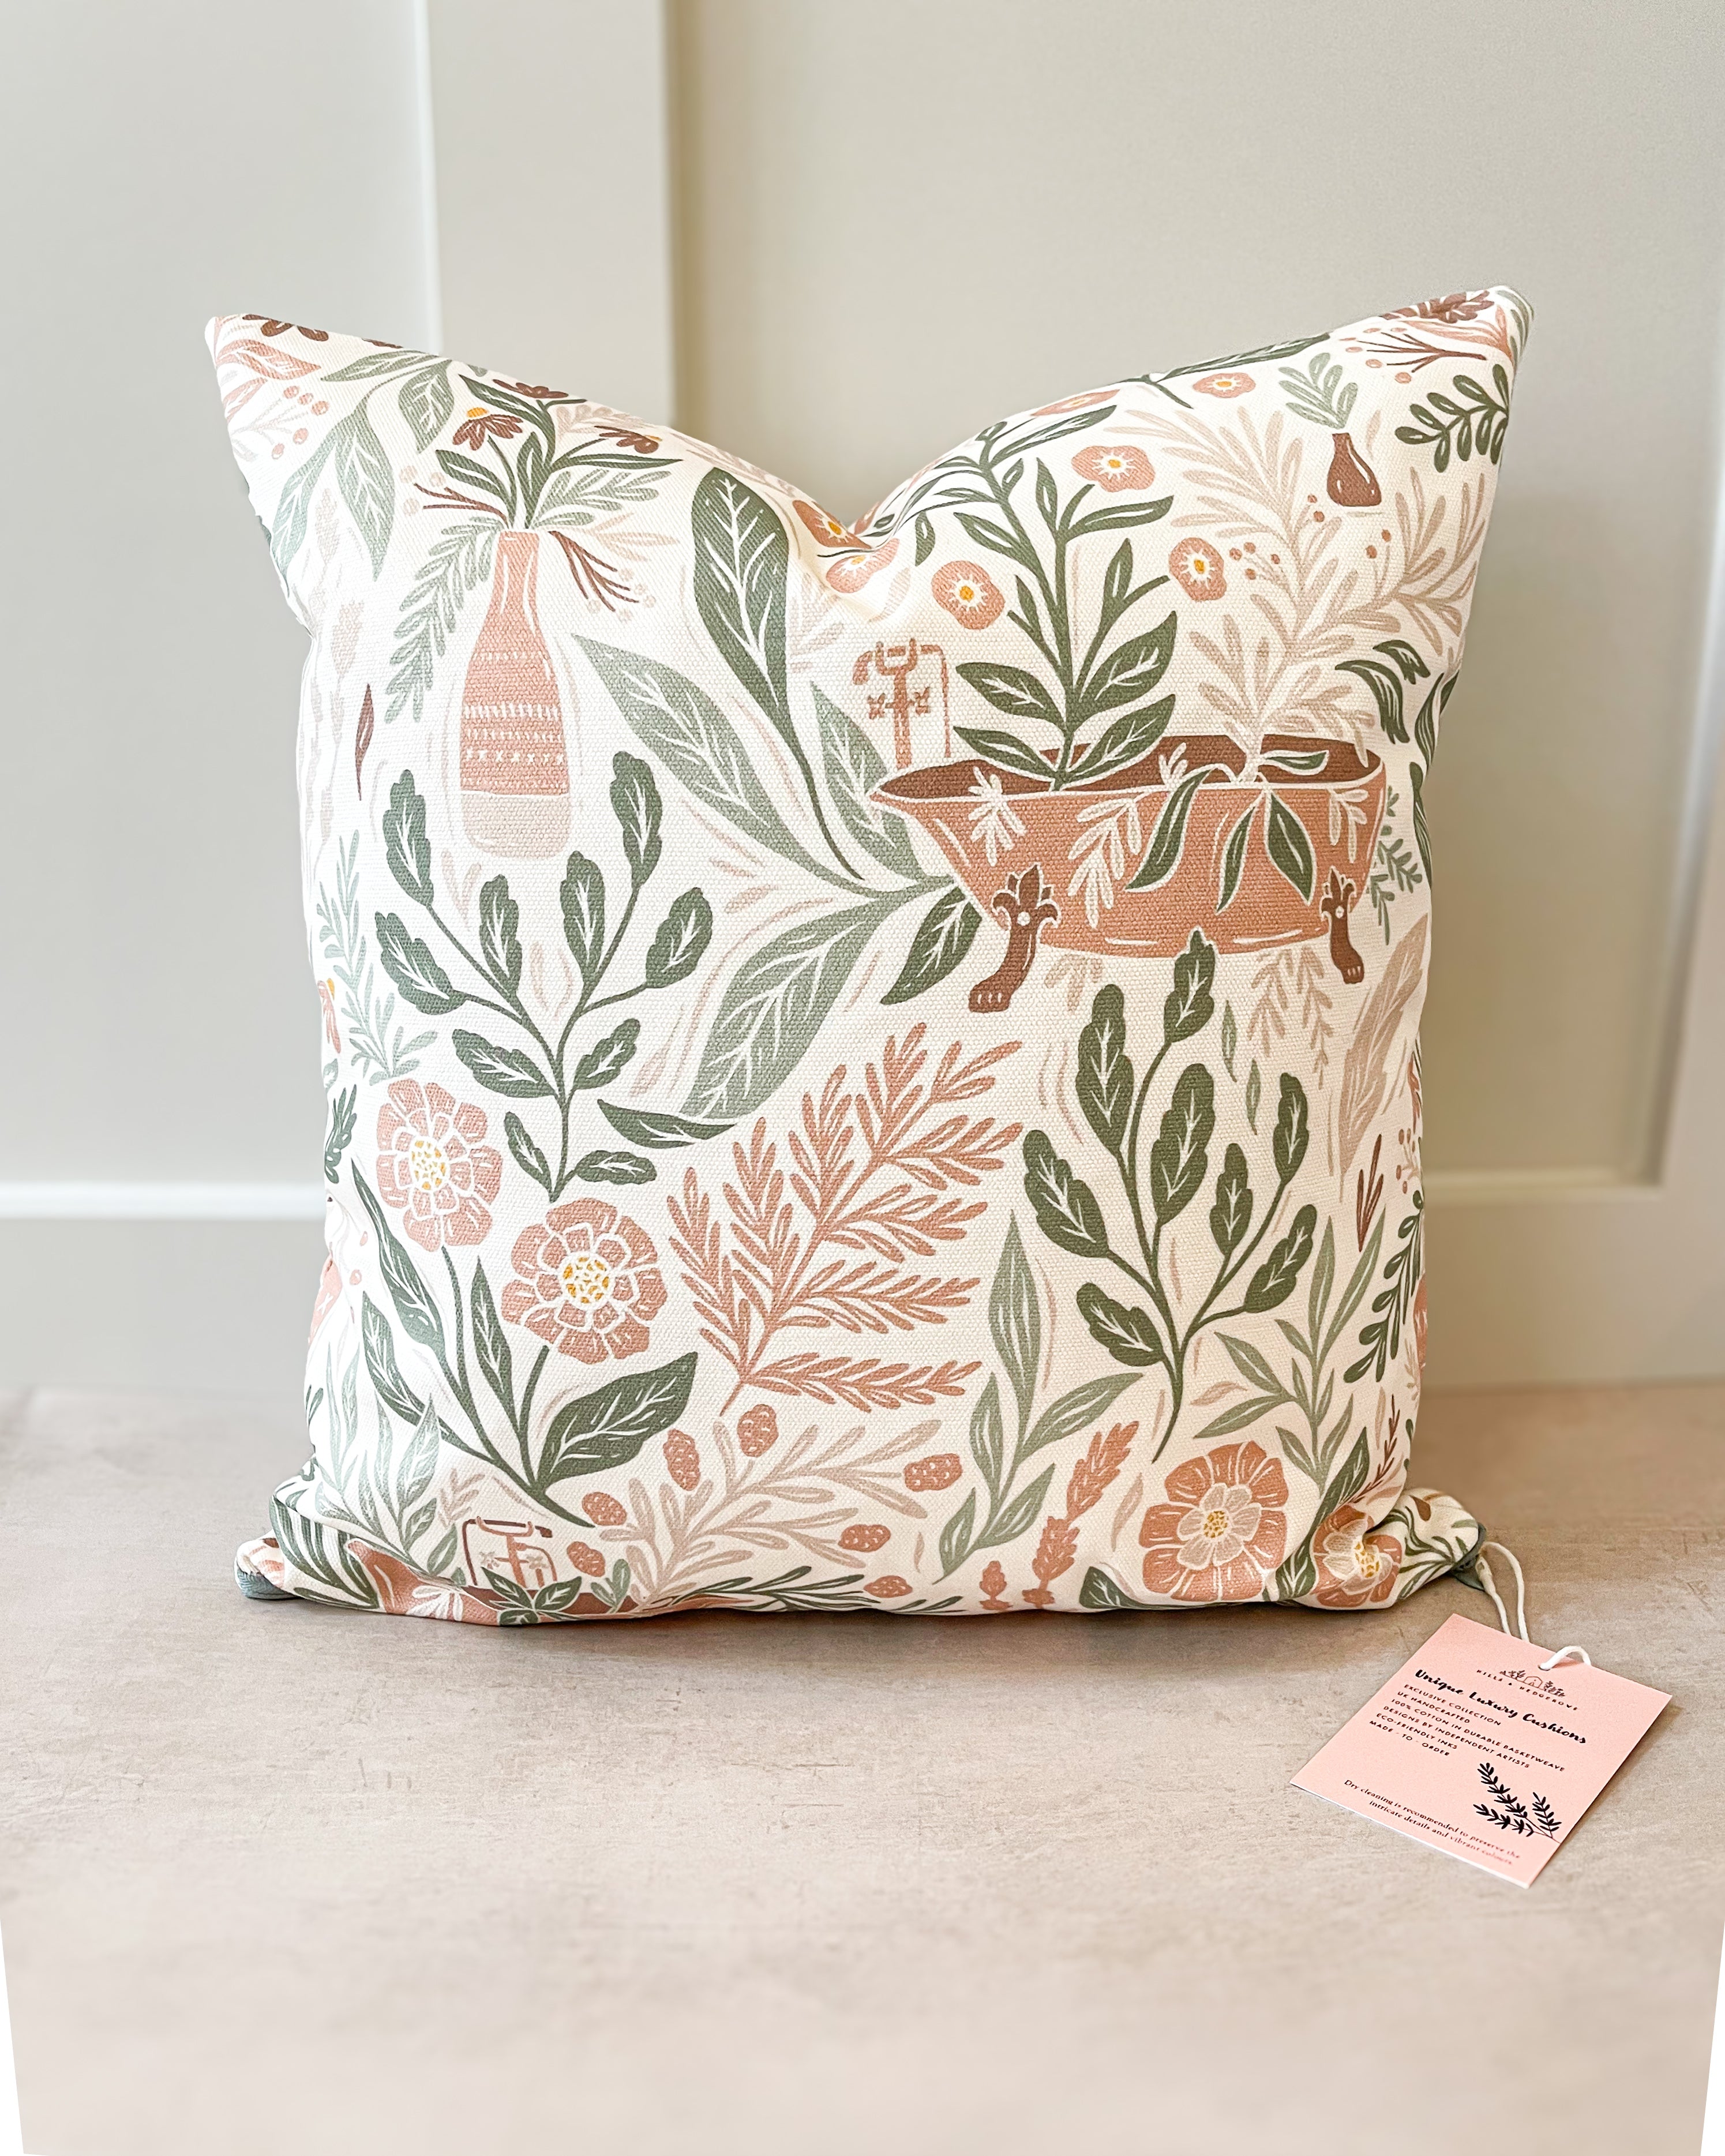 Botanical-inspired decorative cushion with lush green and floral patterns, handmade in the UK from sustainable basketweave cotton.